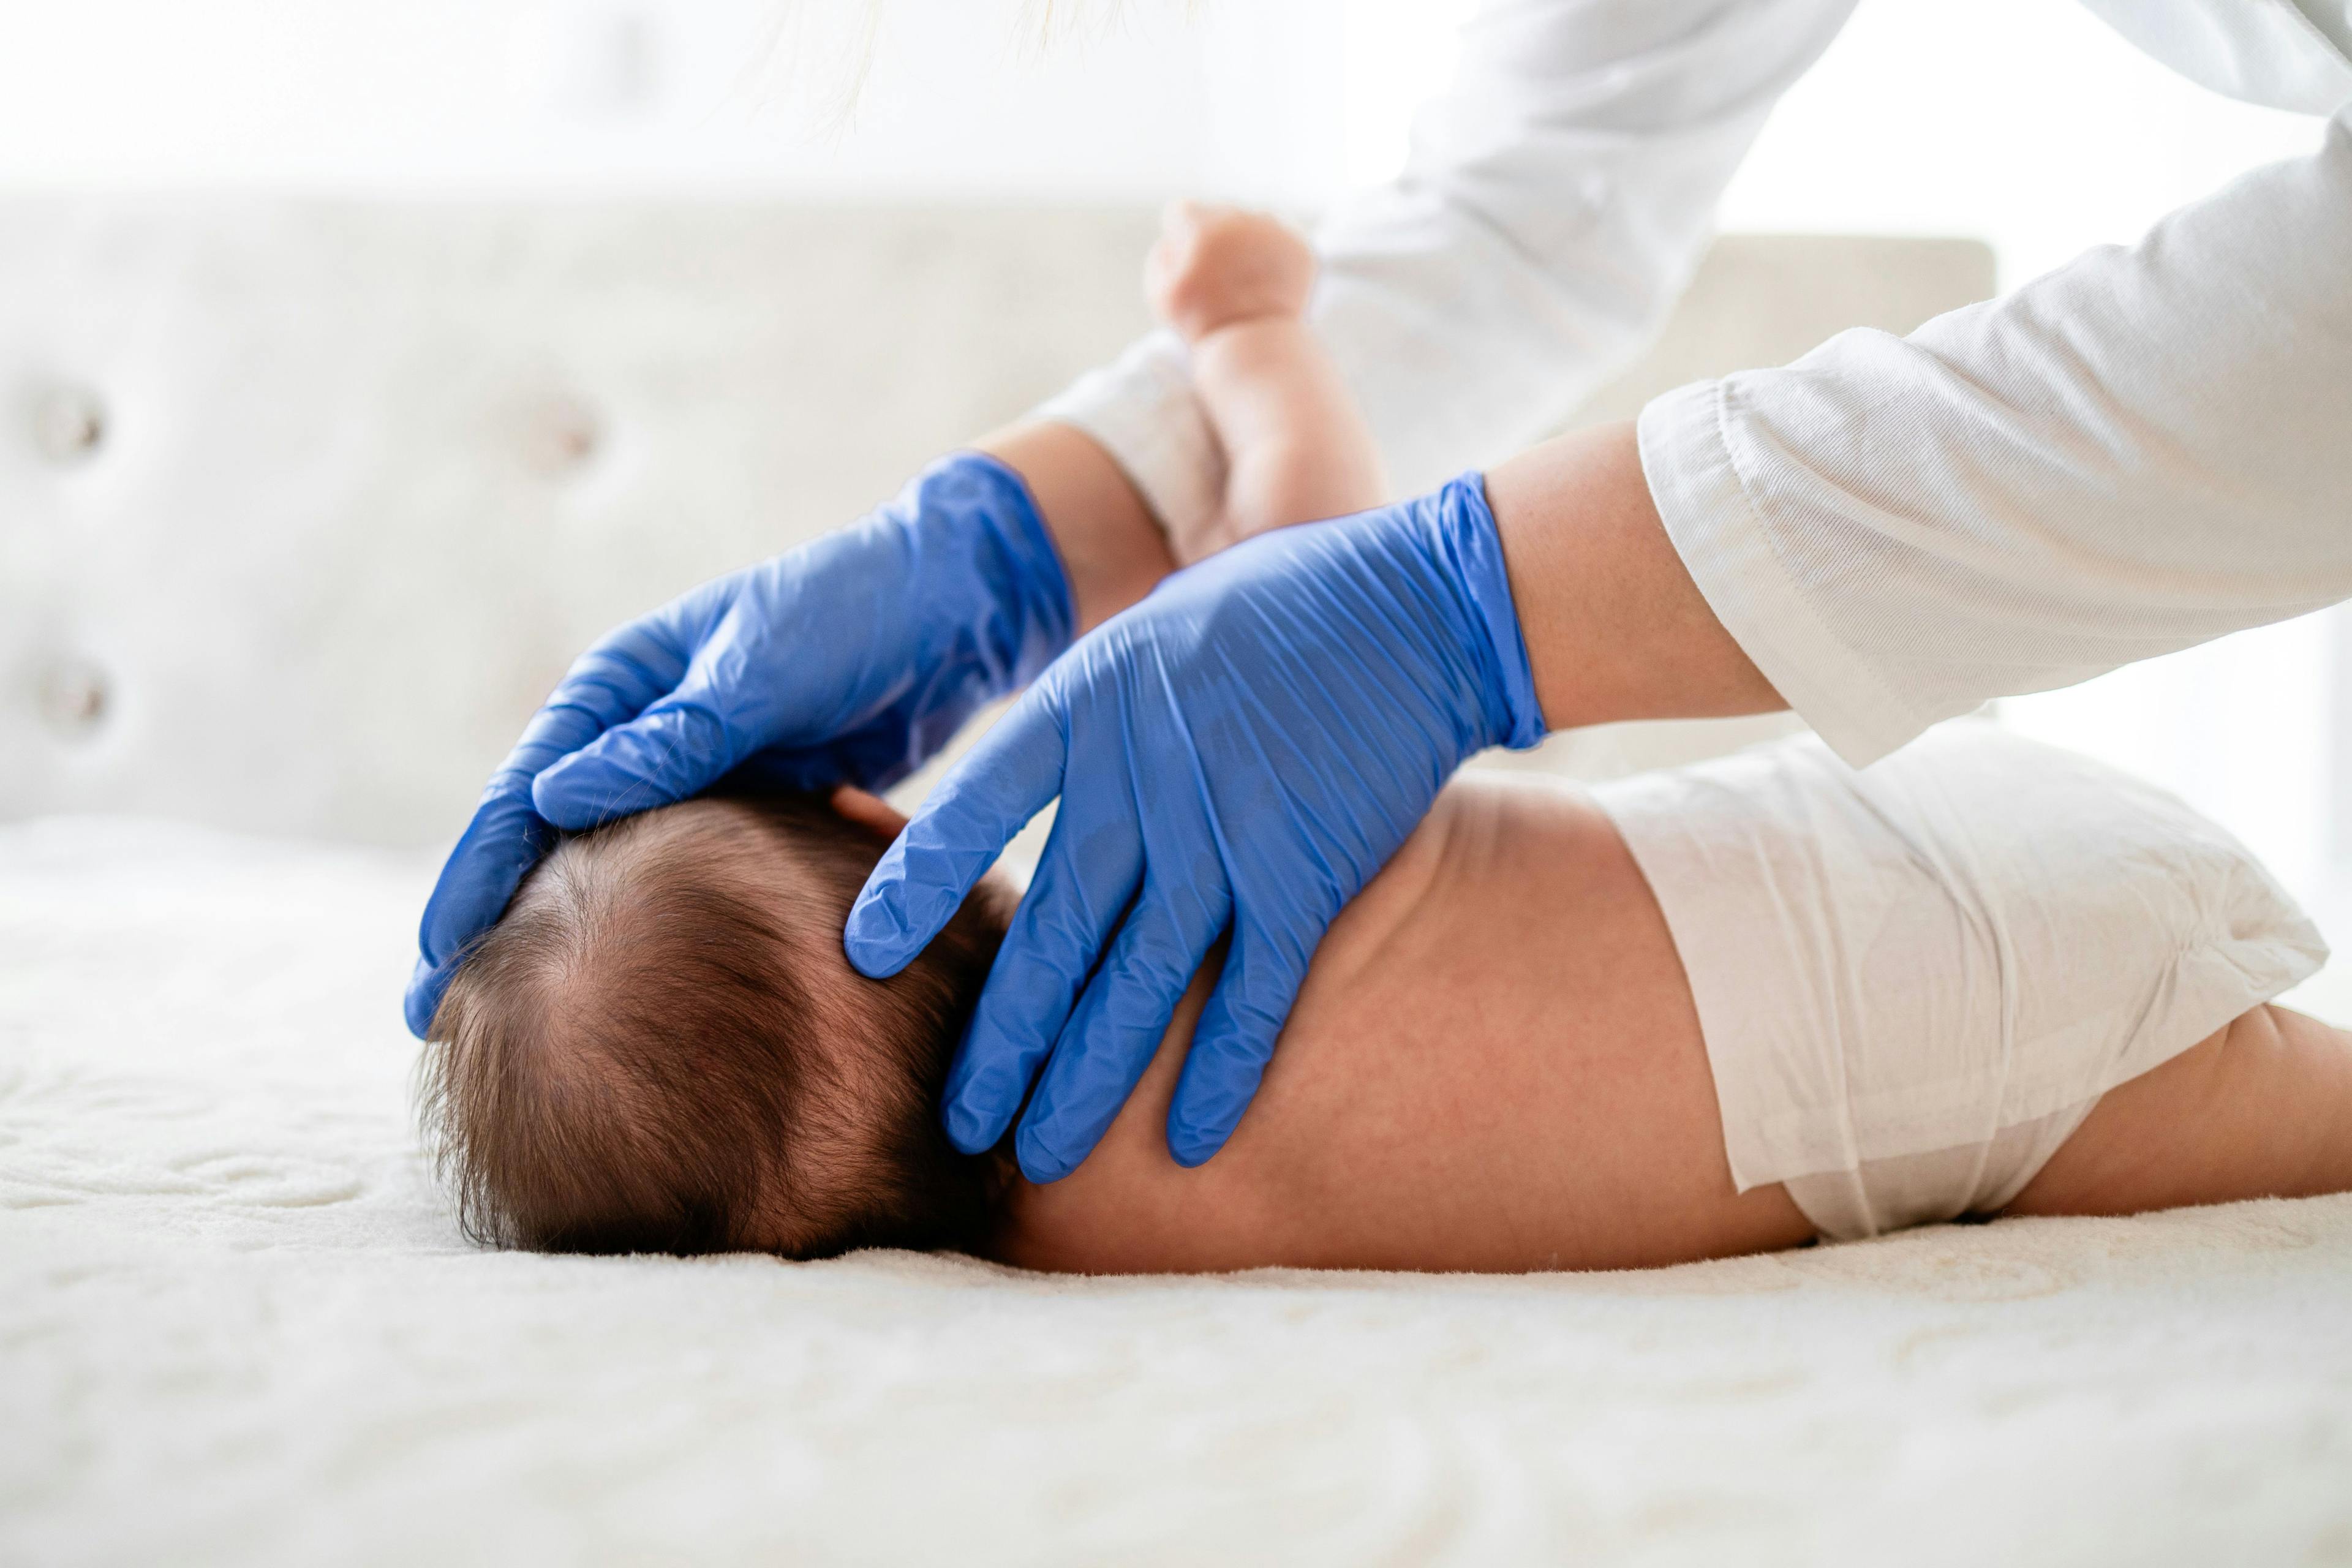 Doctor examines scalp of baby for hair loss. | Image Credit:  littlewolf1989 - stock.adobe.com